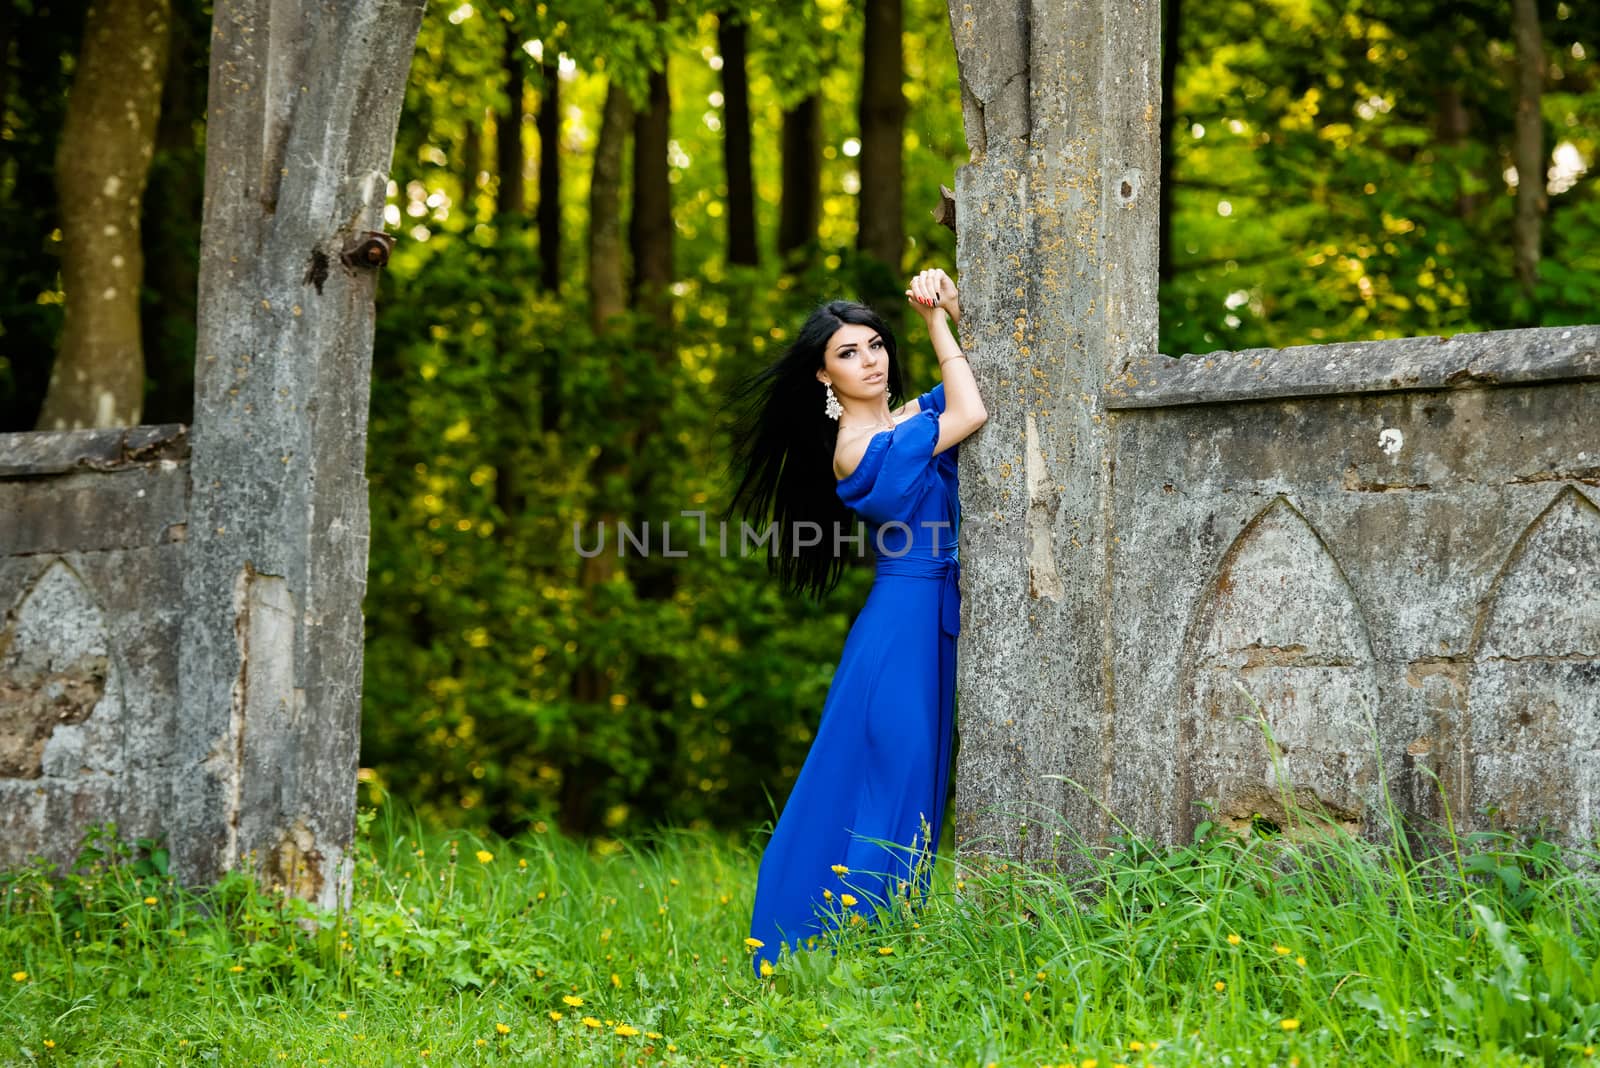 Portrait of sensual fashion young woman in blue dress outdoor